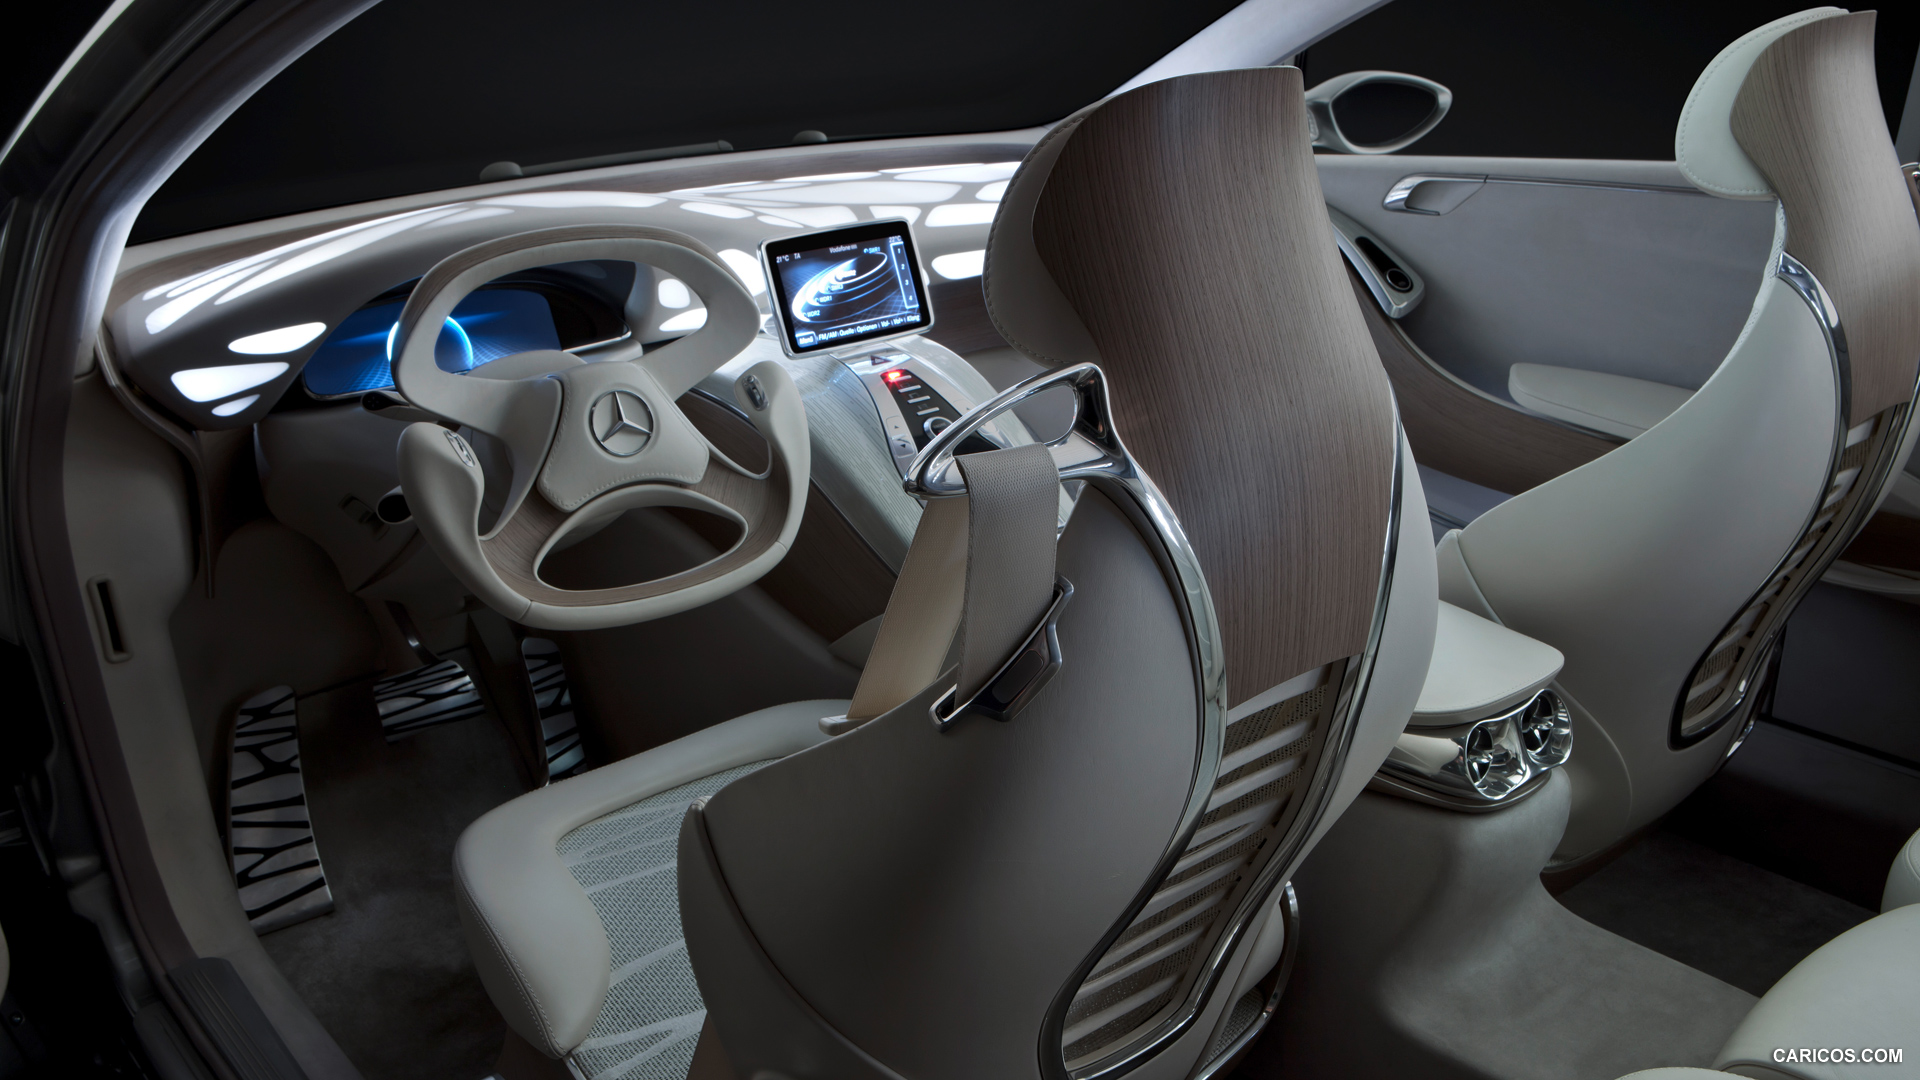 Mercedes-Benz F800 Style Concept (2010)  - Interior, Front Seats, #46 of 120